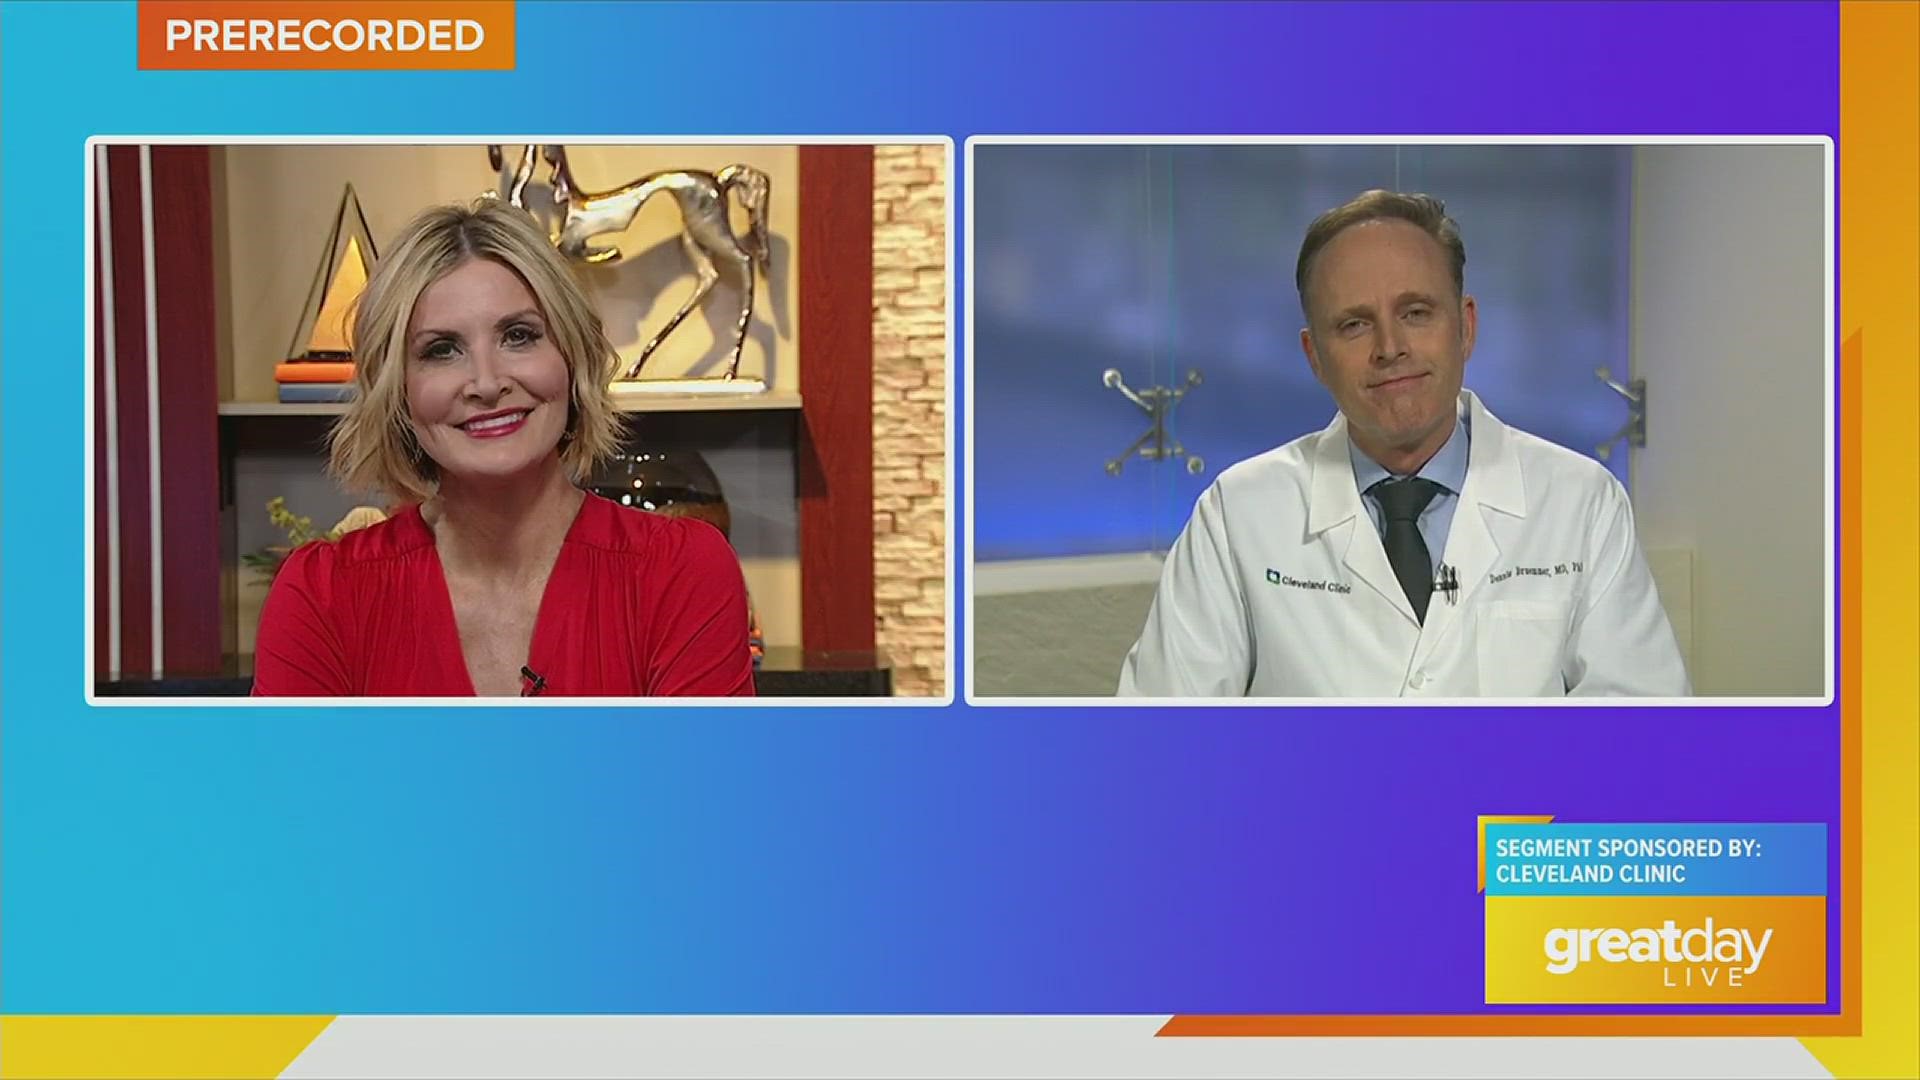 Cleveland Clinic on Great Day Live!